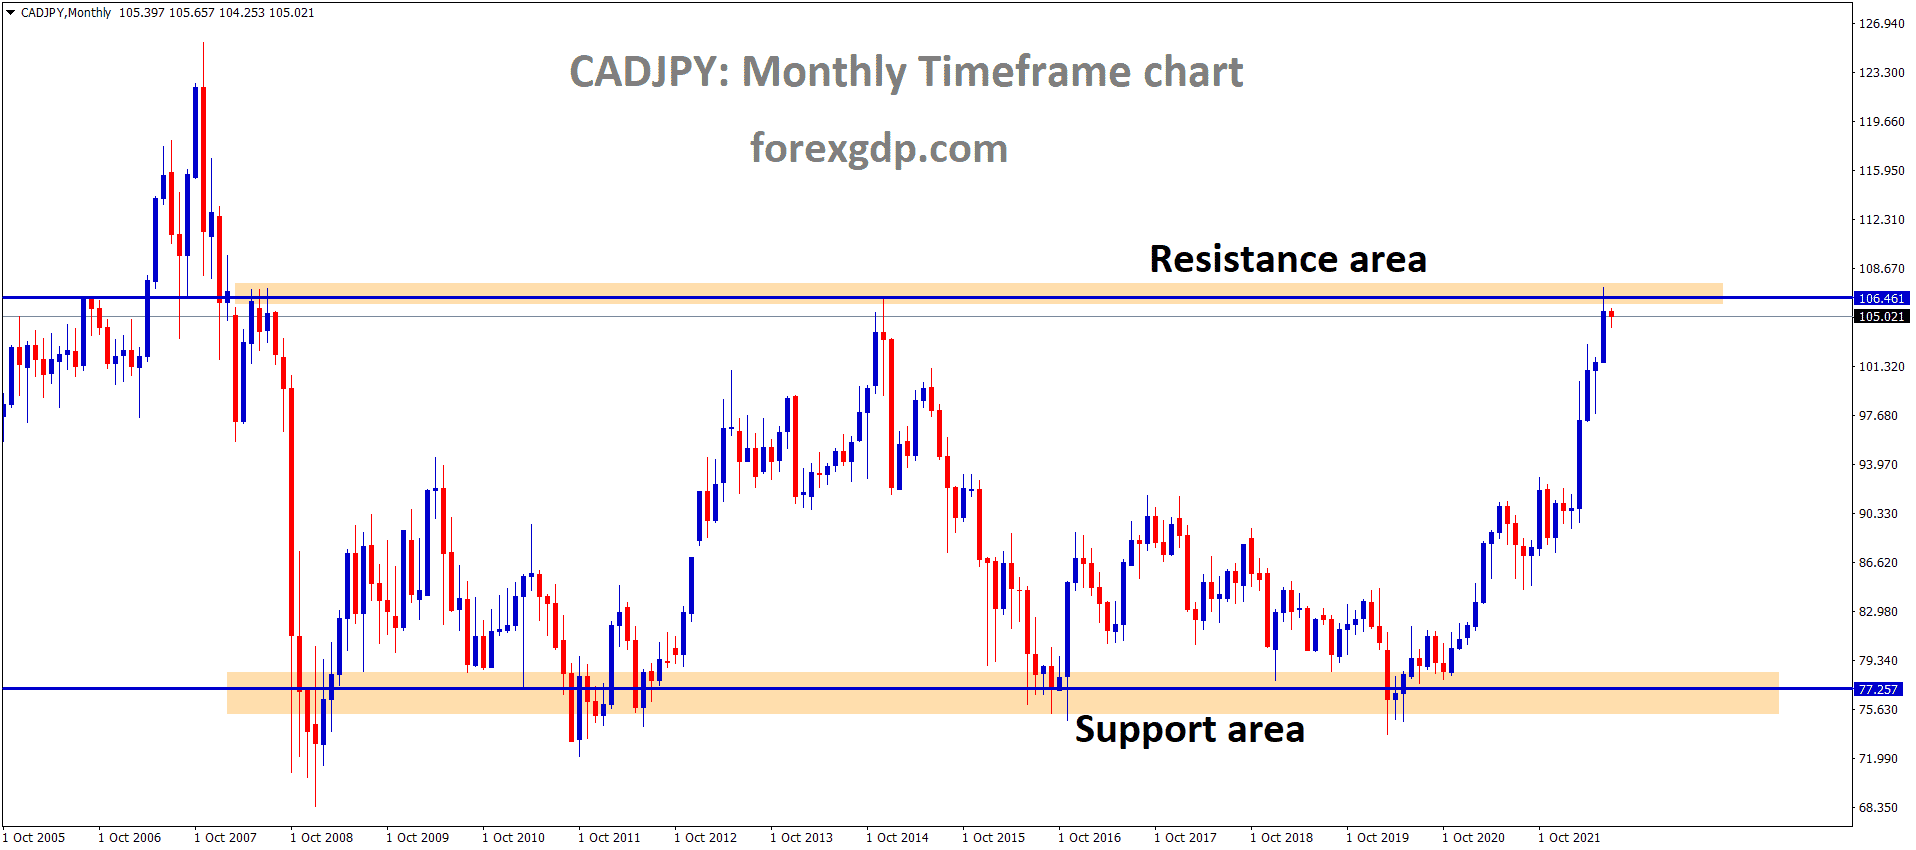 CADJPY is moving in the Box Pattern and the Market has reached the Horizontal resistance area of the Pattern